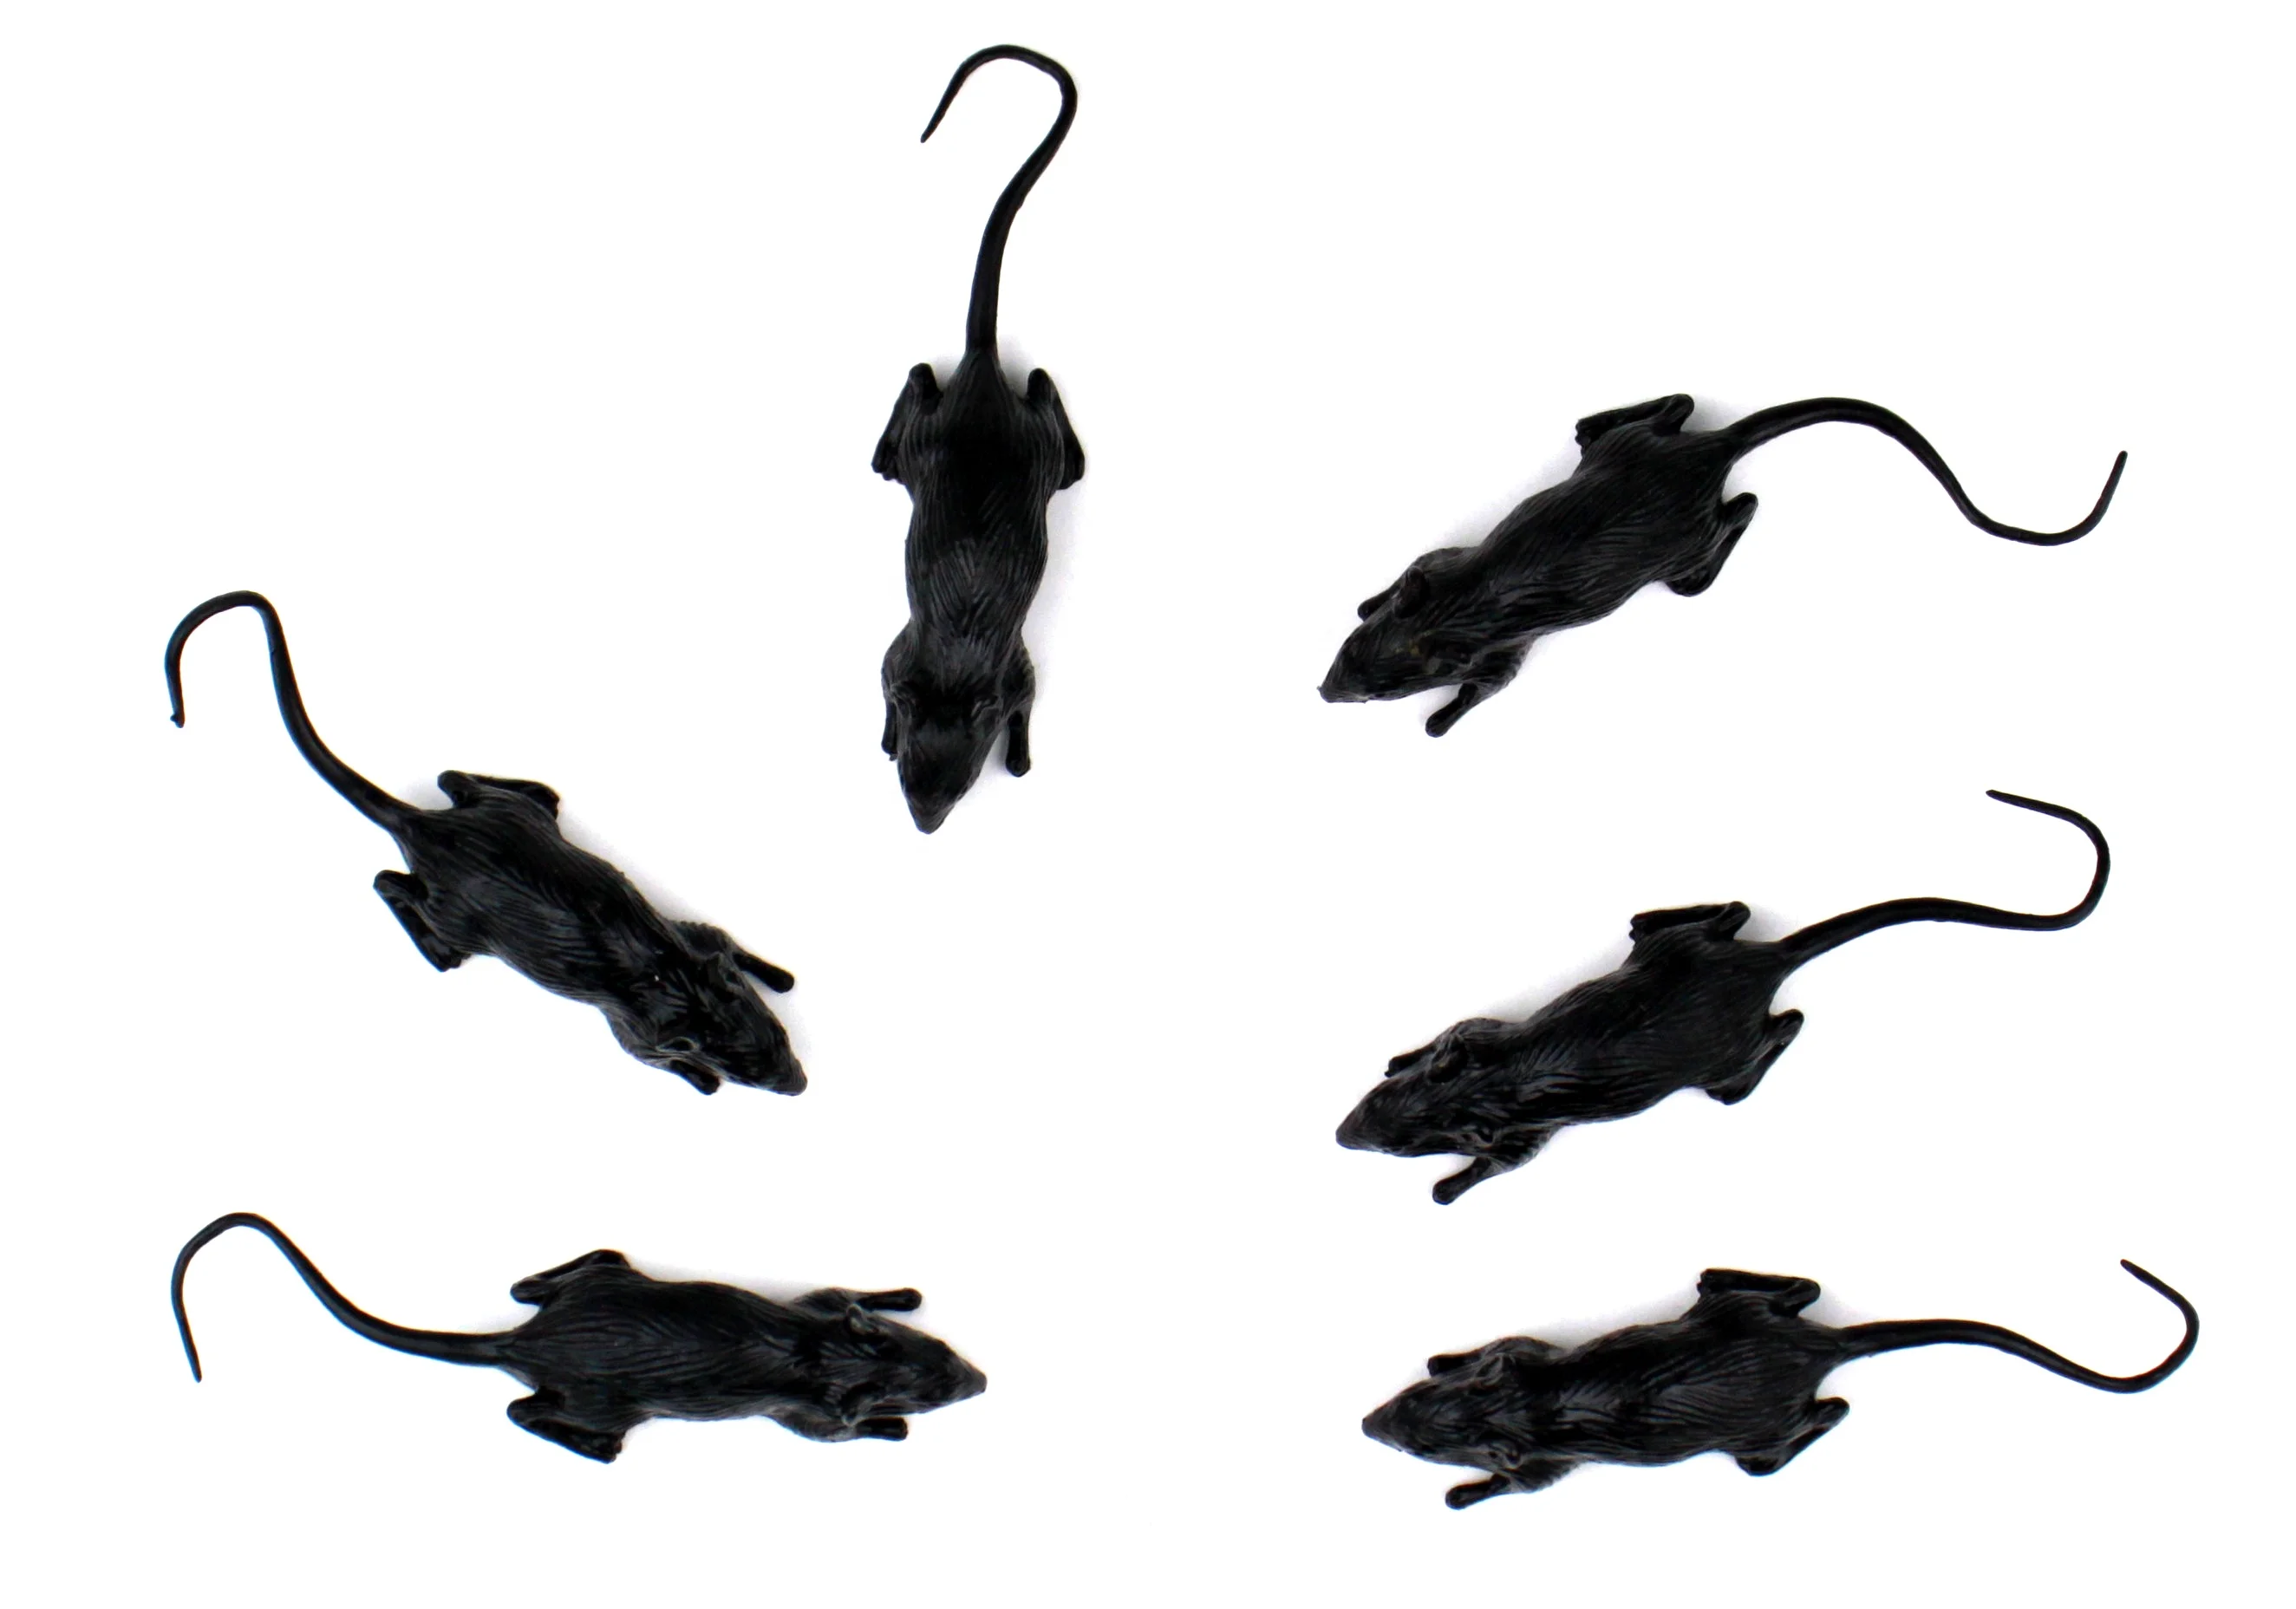 6 Black Plastic Rats - Halloween Toy Loot/Party Bag Fillers Decoration Scare